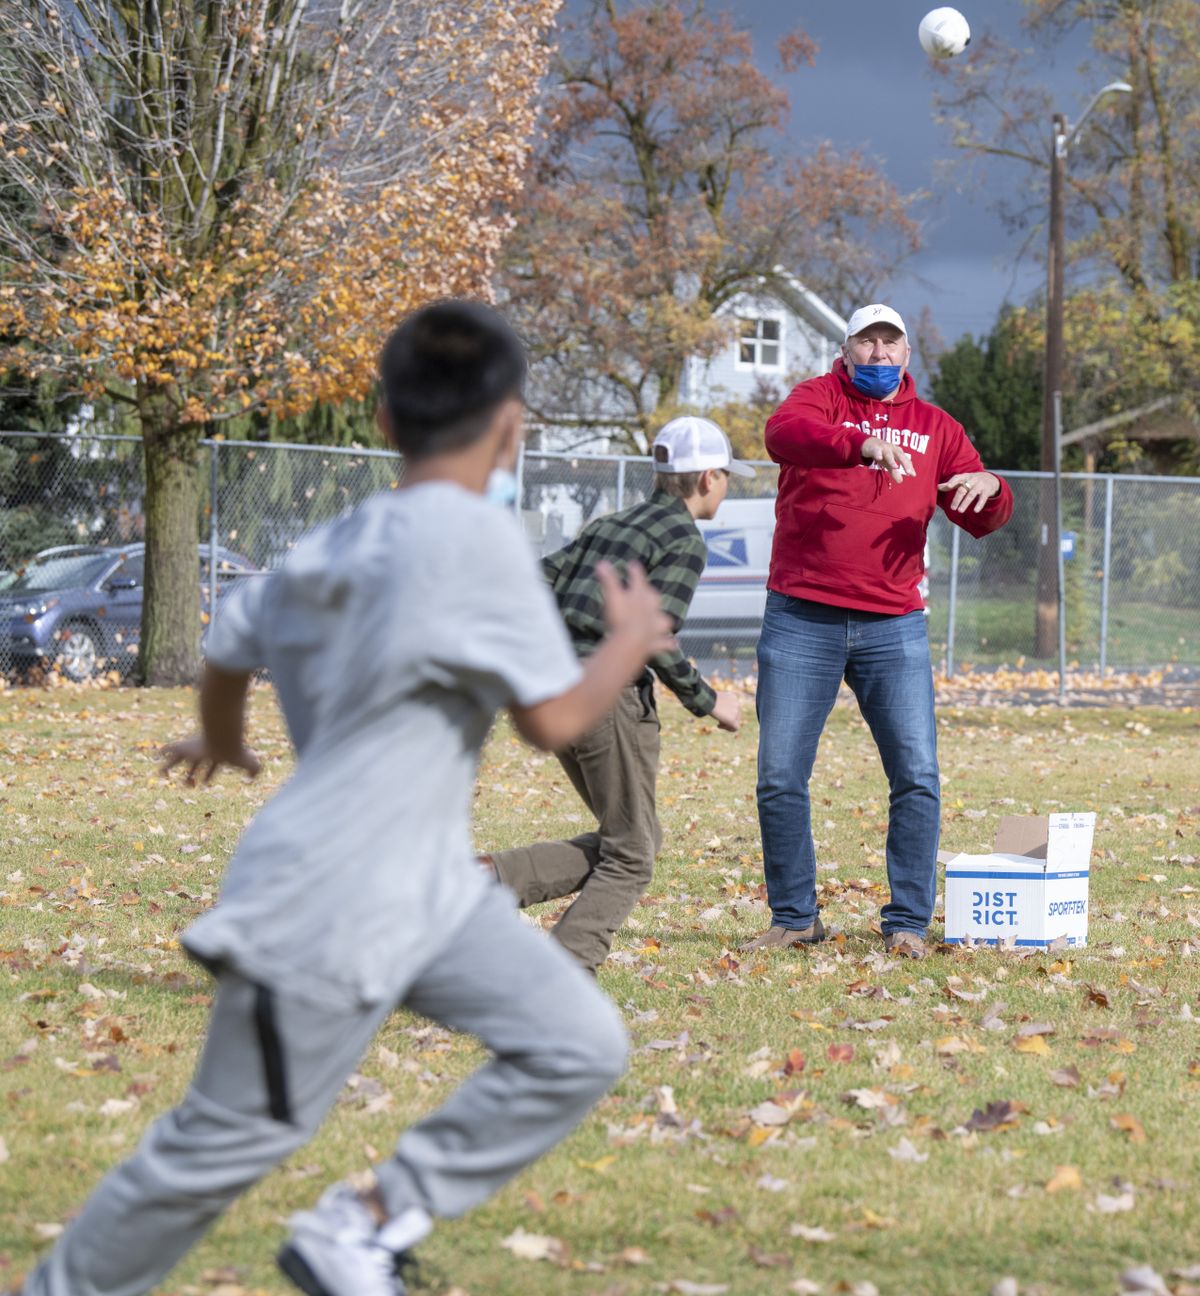 Former NFL quarterback Mark Rypien, upper right, throws a ball intended for sixth-grader Jenton Clement, left, on the playfield at Willard Elementary School on Friday, Oct. 29, 2021, in Spokane, Wash. Teaching assistant Chauncy Welliver invited Rypien, the 1992 Super Bowl MVP, to talk to the students and for each of them to have a chance to catch a pass from Rypien on the playground.  (Jesse Tinsley/THE SPOKESMAN-REVI)